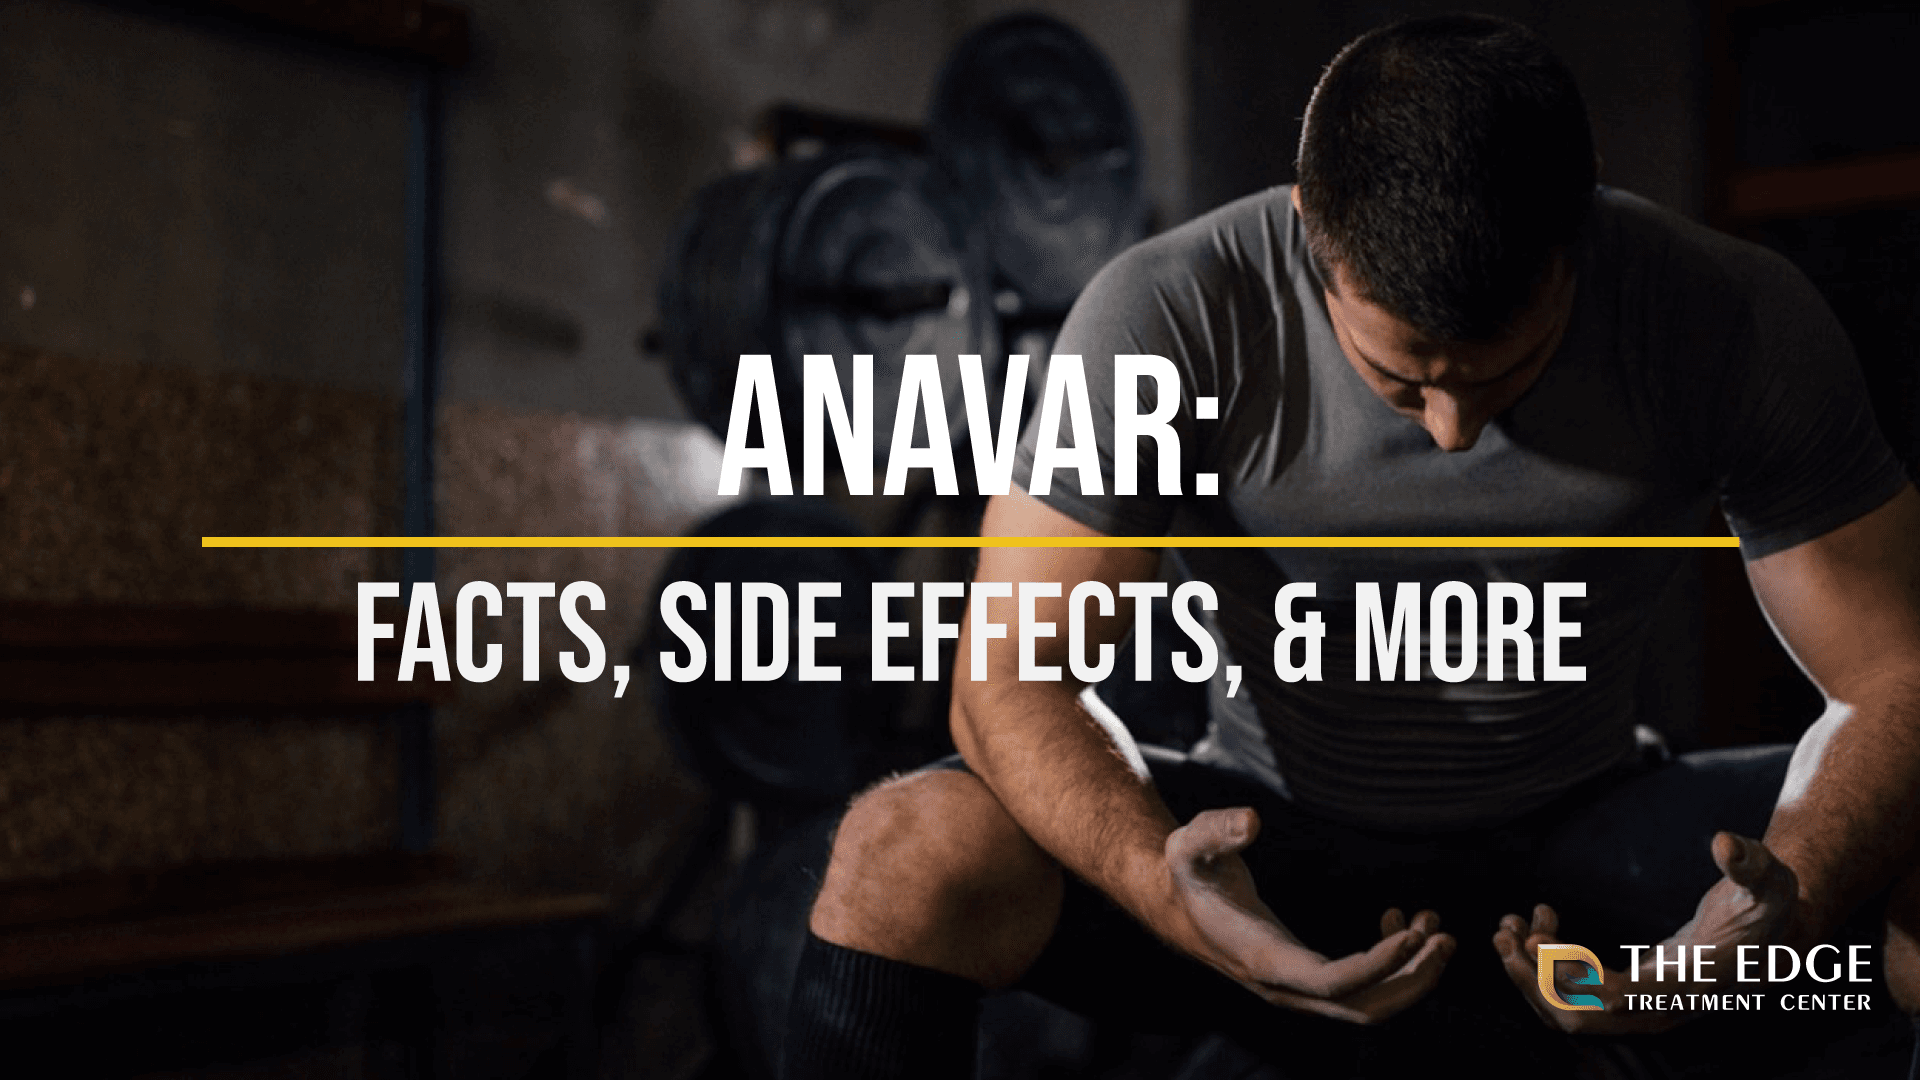 What Do YOU Know About Anavar? Effects, Steroid Abuse, and More